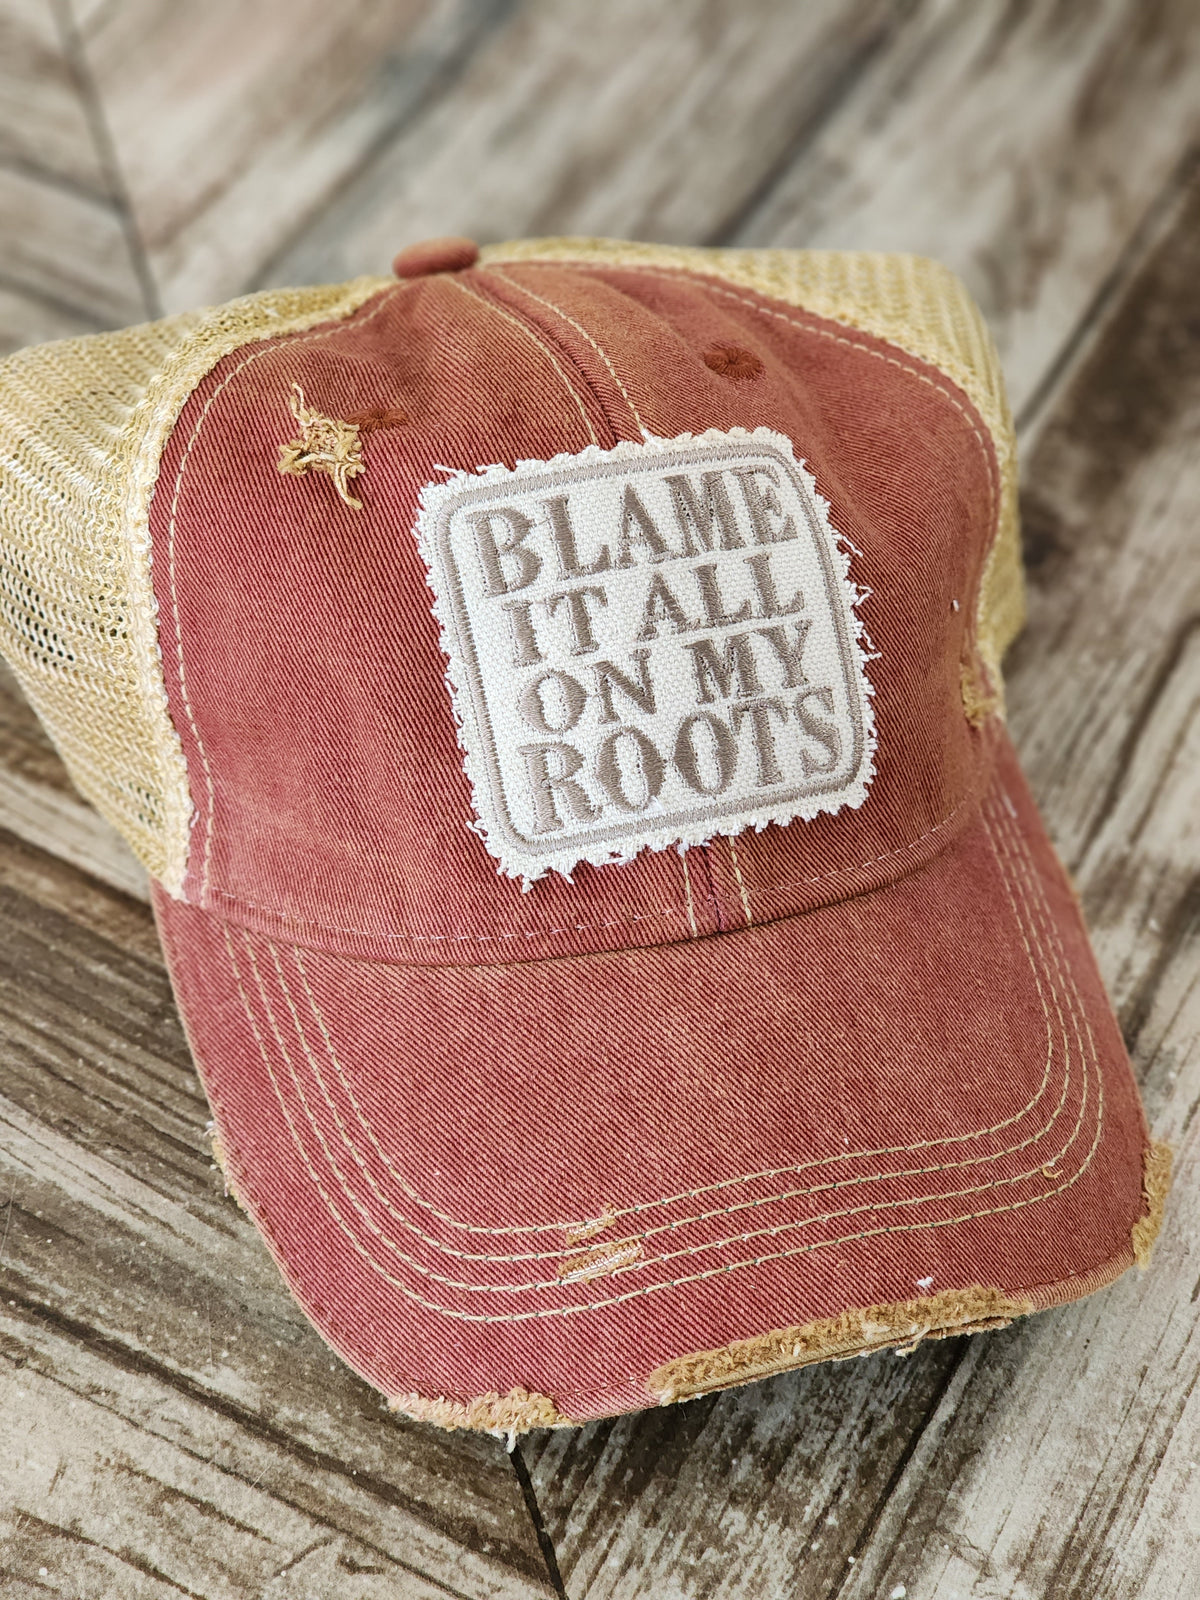 Blame it on my Roots Distressed Mesh Baseball Cap